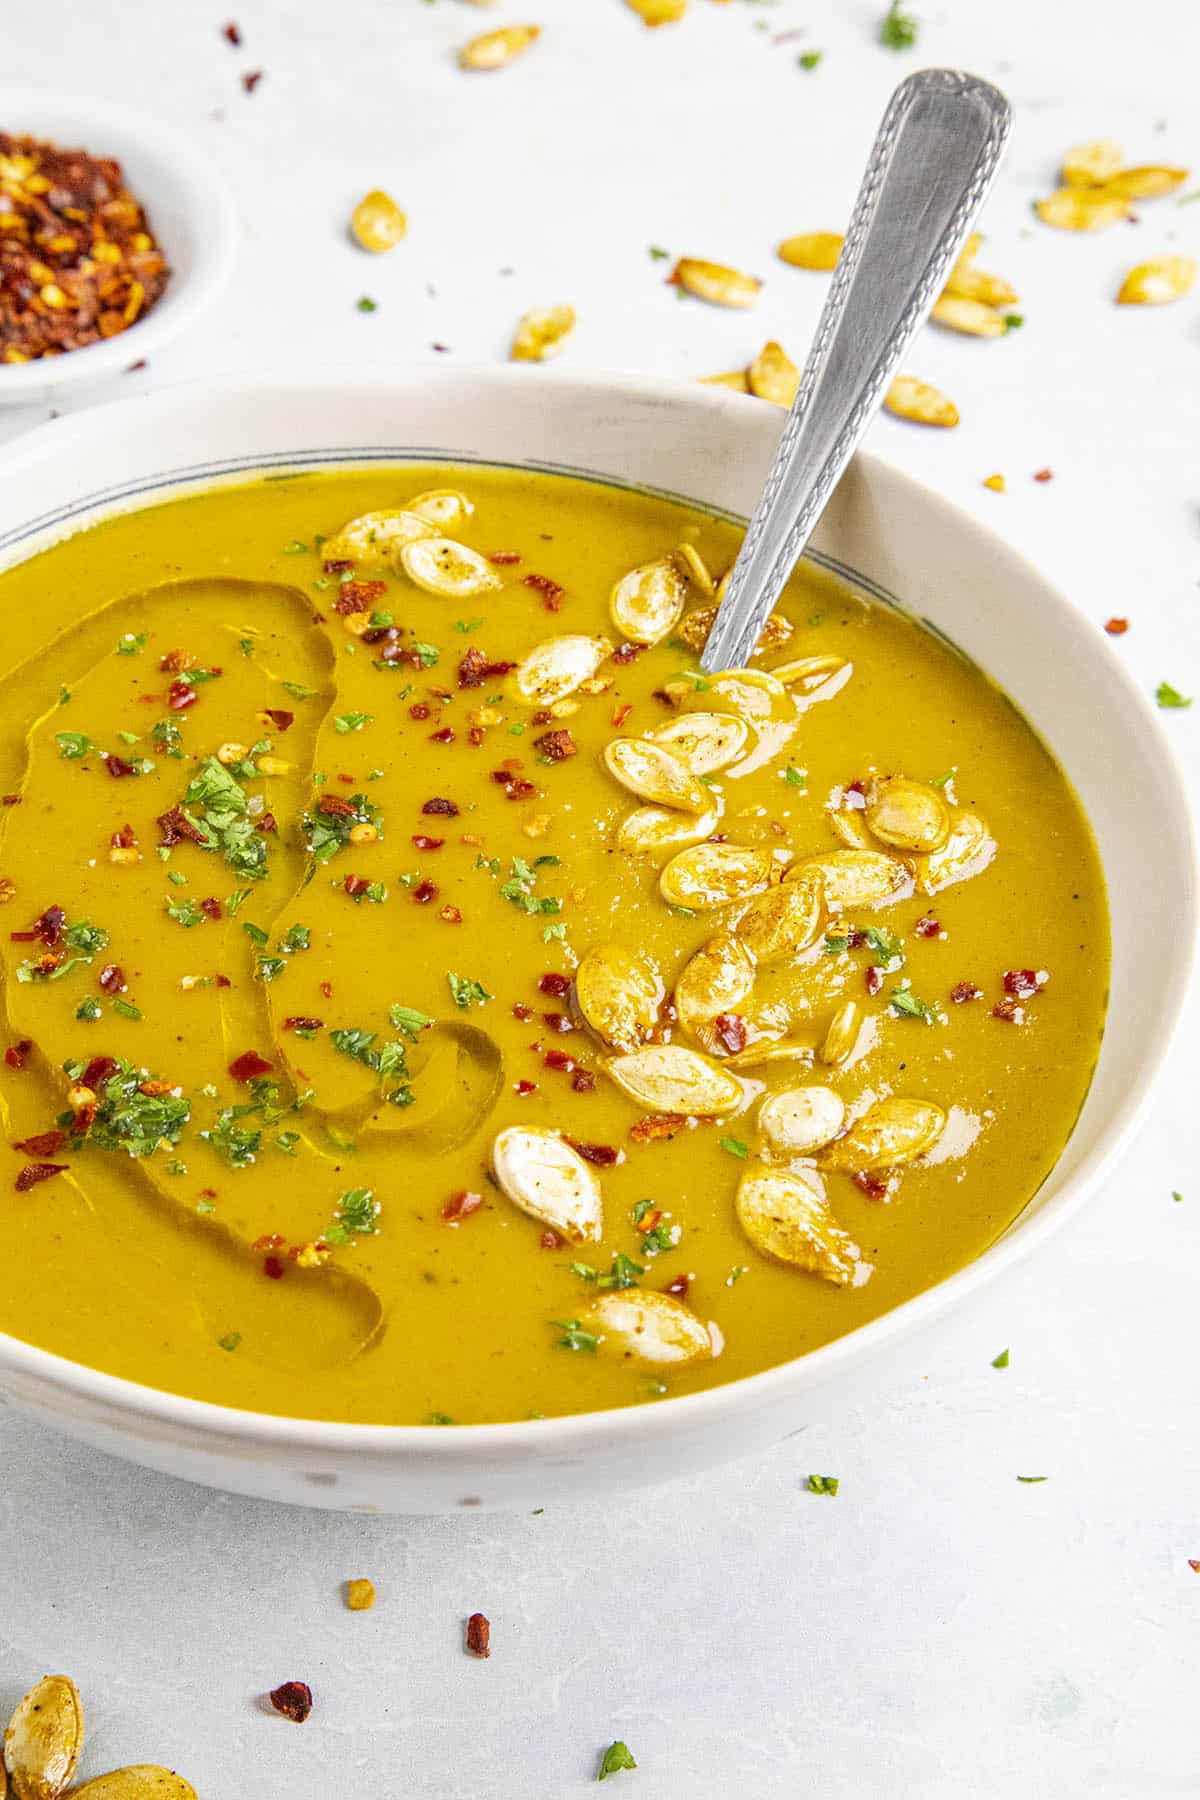 Spicy Pumpkin Soup in a bowl with pumpkin seeds for garnish